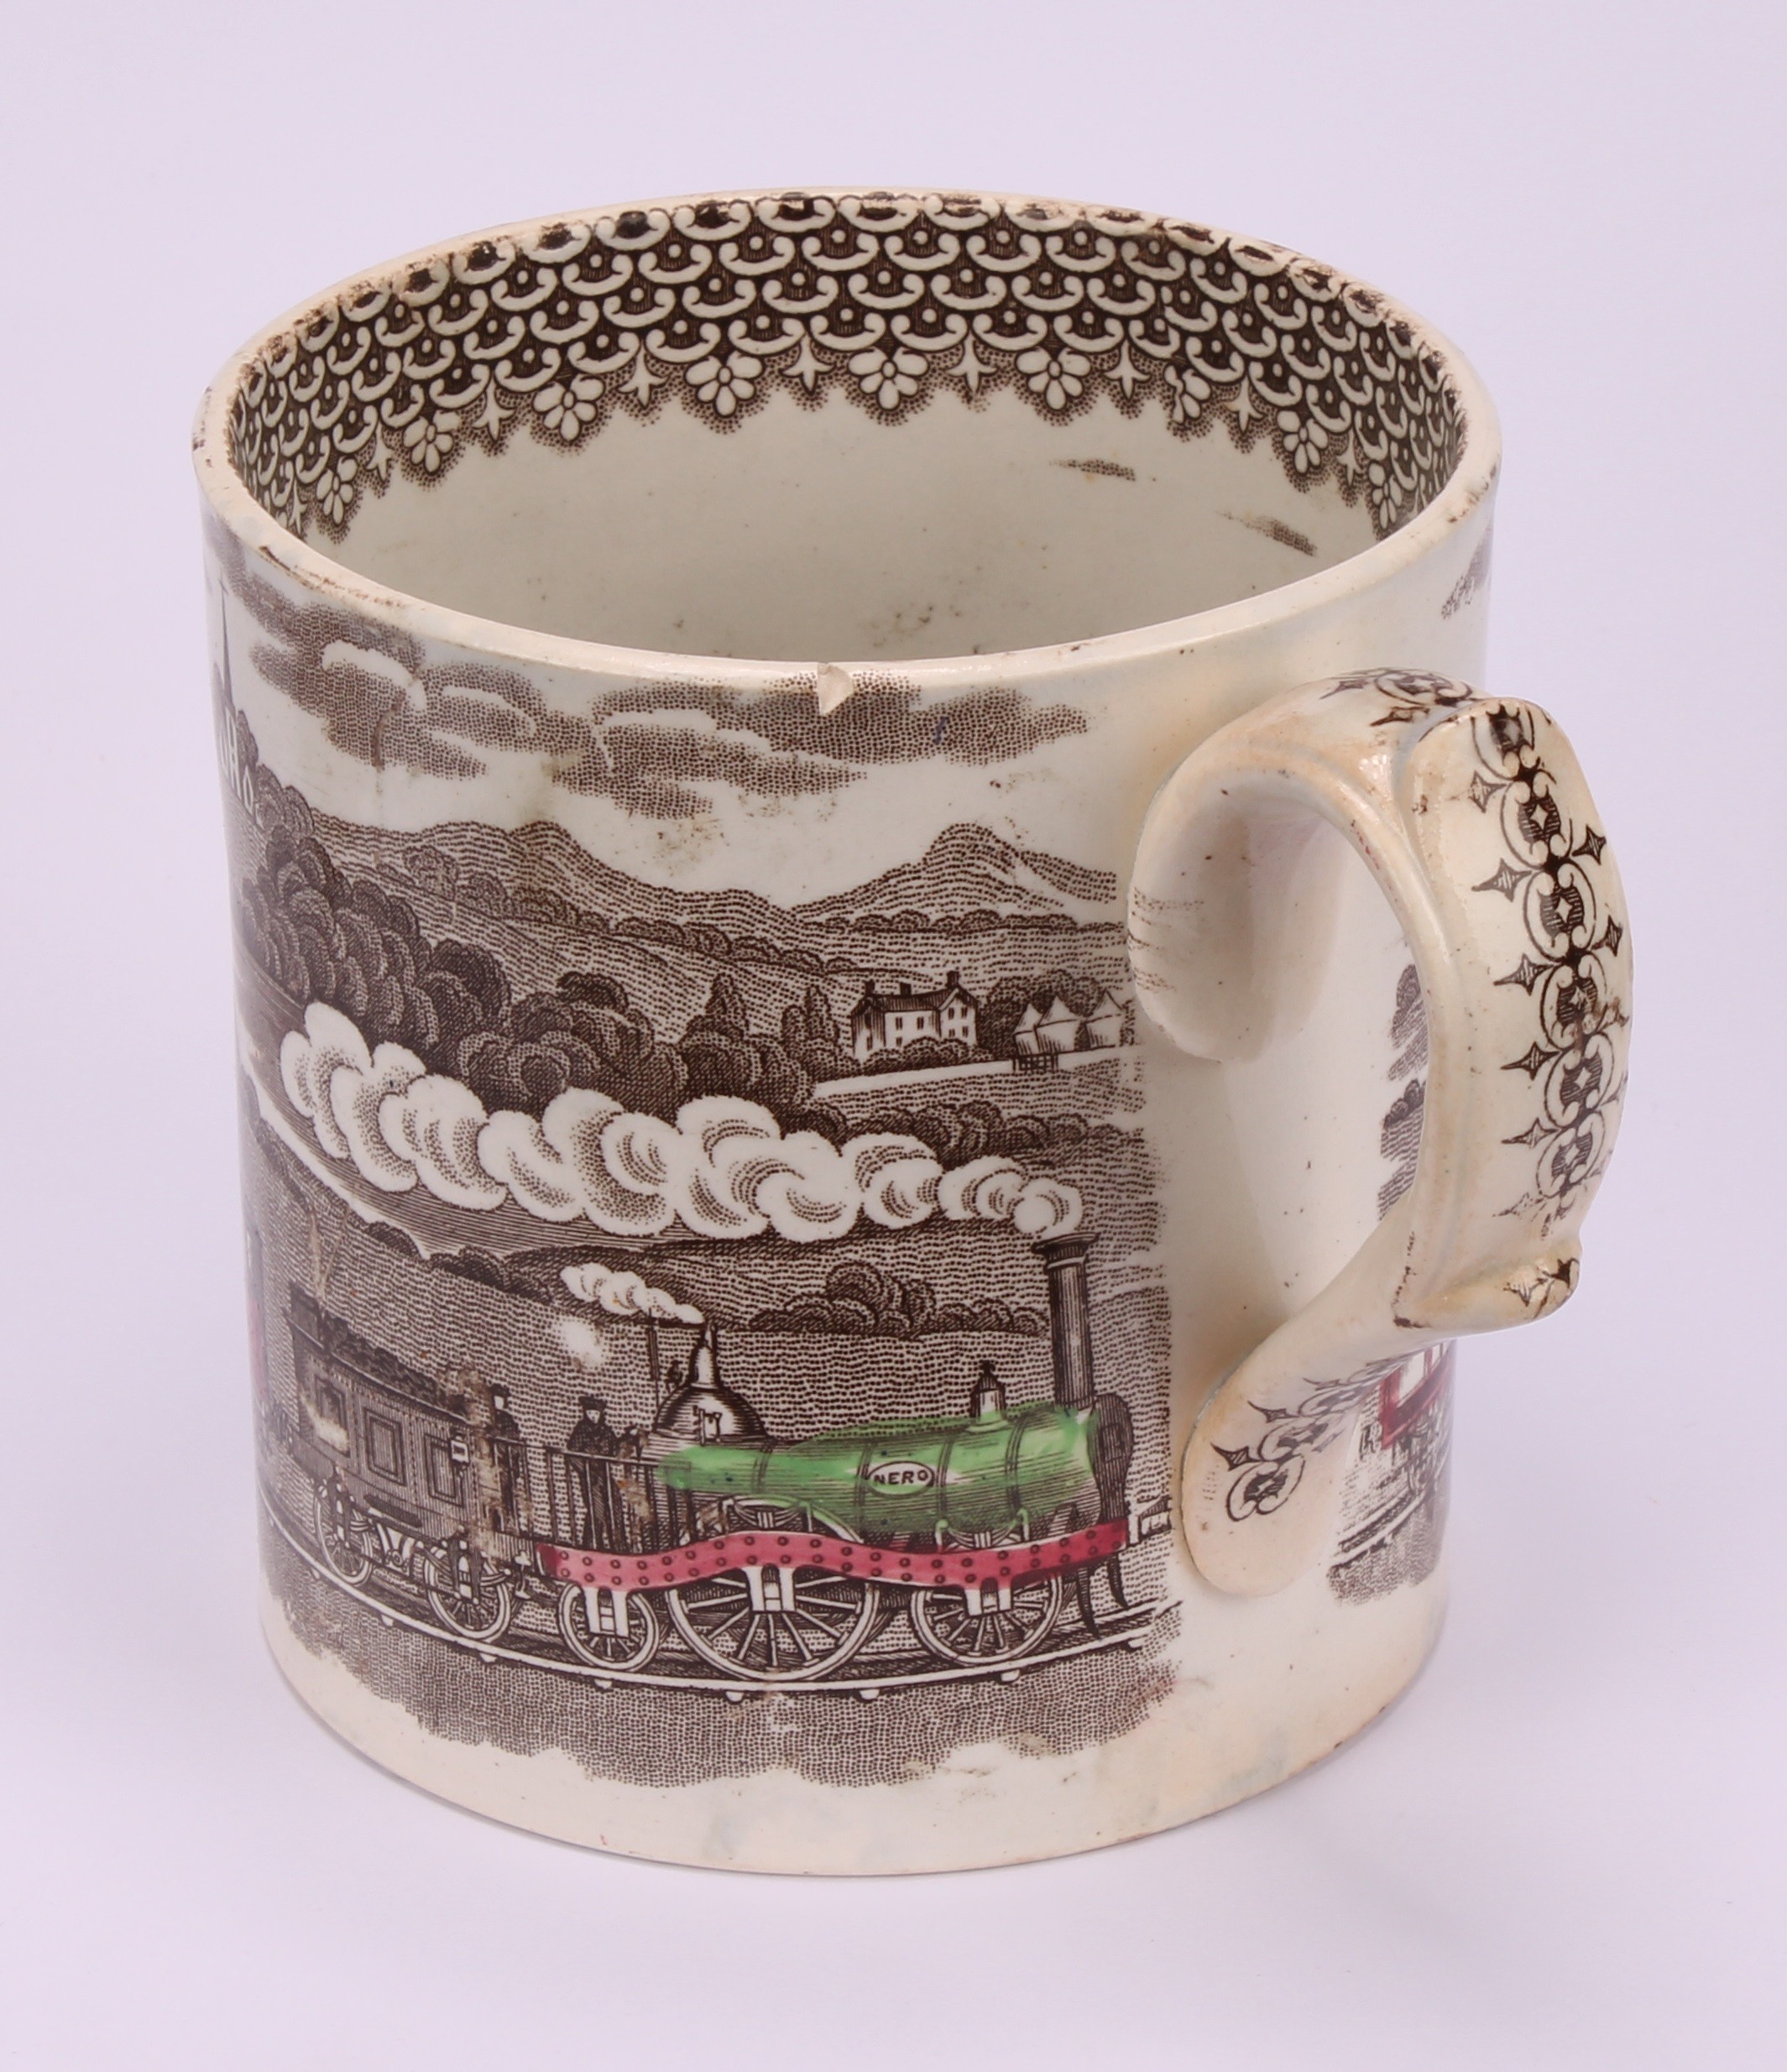 Railway Interest - steam locomotives, a 19th century Staffordshire pearlware mug, printed in sepia - Image 4 of 10